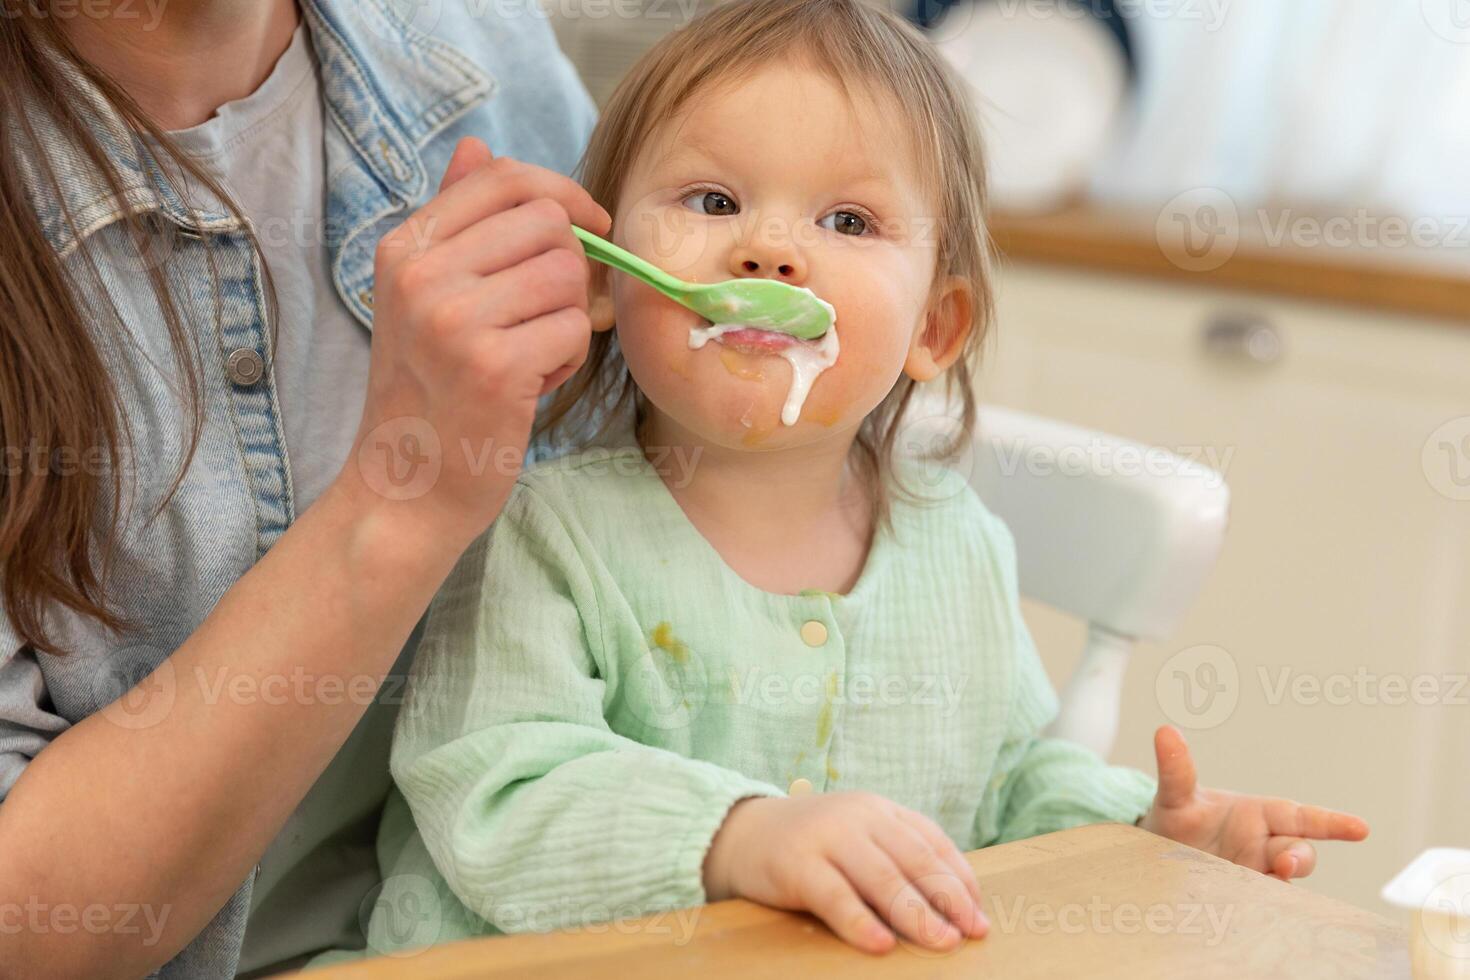 Happy family at home. Mother feeding her baby girl from spoon in kitchen. Little toddler child with messy funny face eats healthy food at home. Young woman mom giving food to kid daughter photo